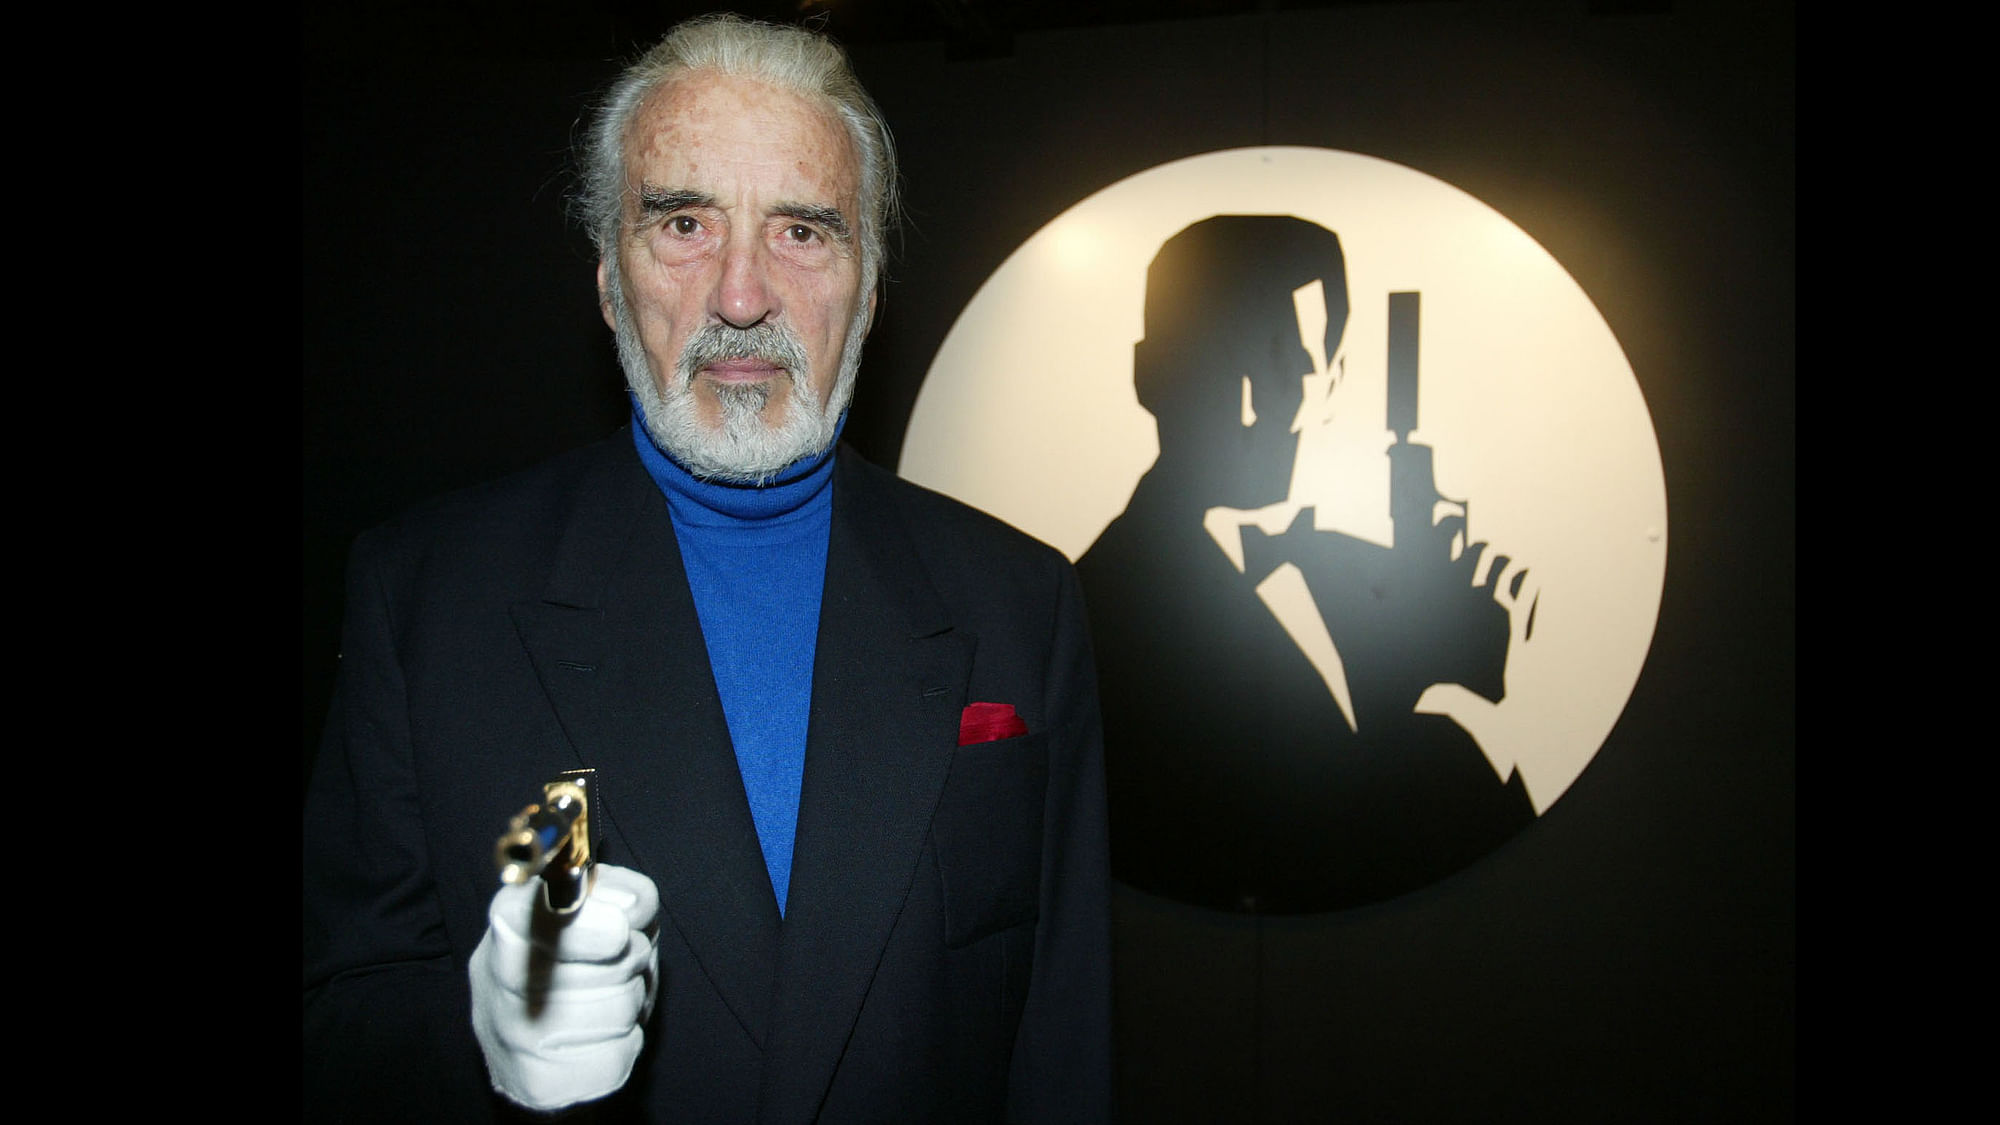 Christopher Lee, who played the part of Bond bad guy Scaramanga in the film “The Man with the Golden Gun”, poses for pictures with the original gun from the James Bond film at the ScienceMuseum in London (Photo: Reuters)